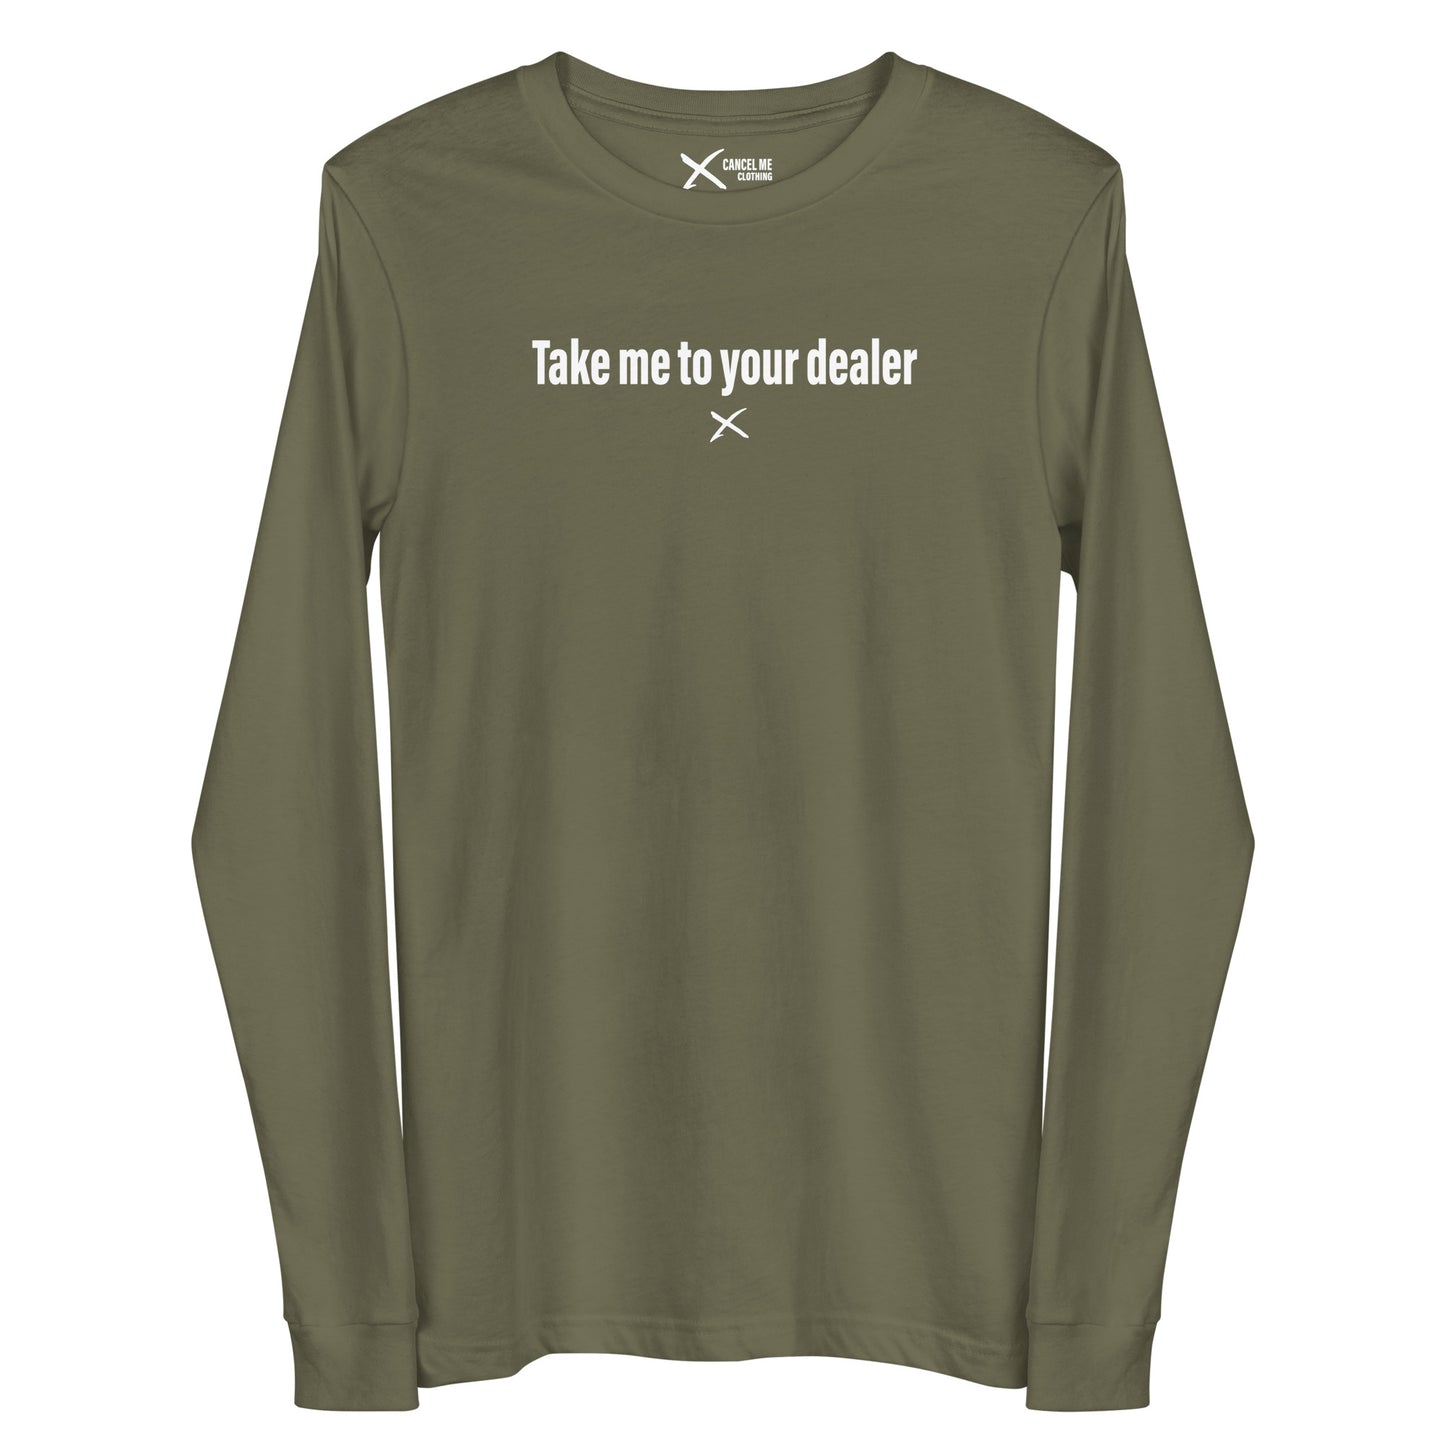 Take me to your dealer - Longsleeve